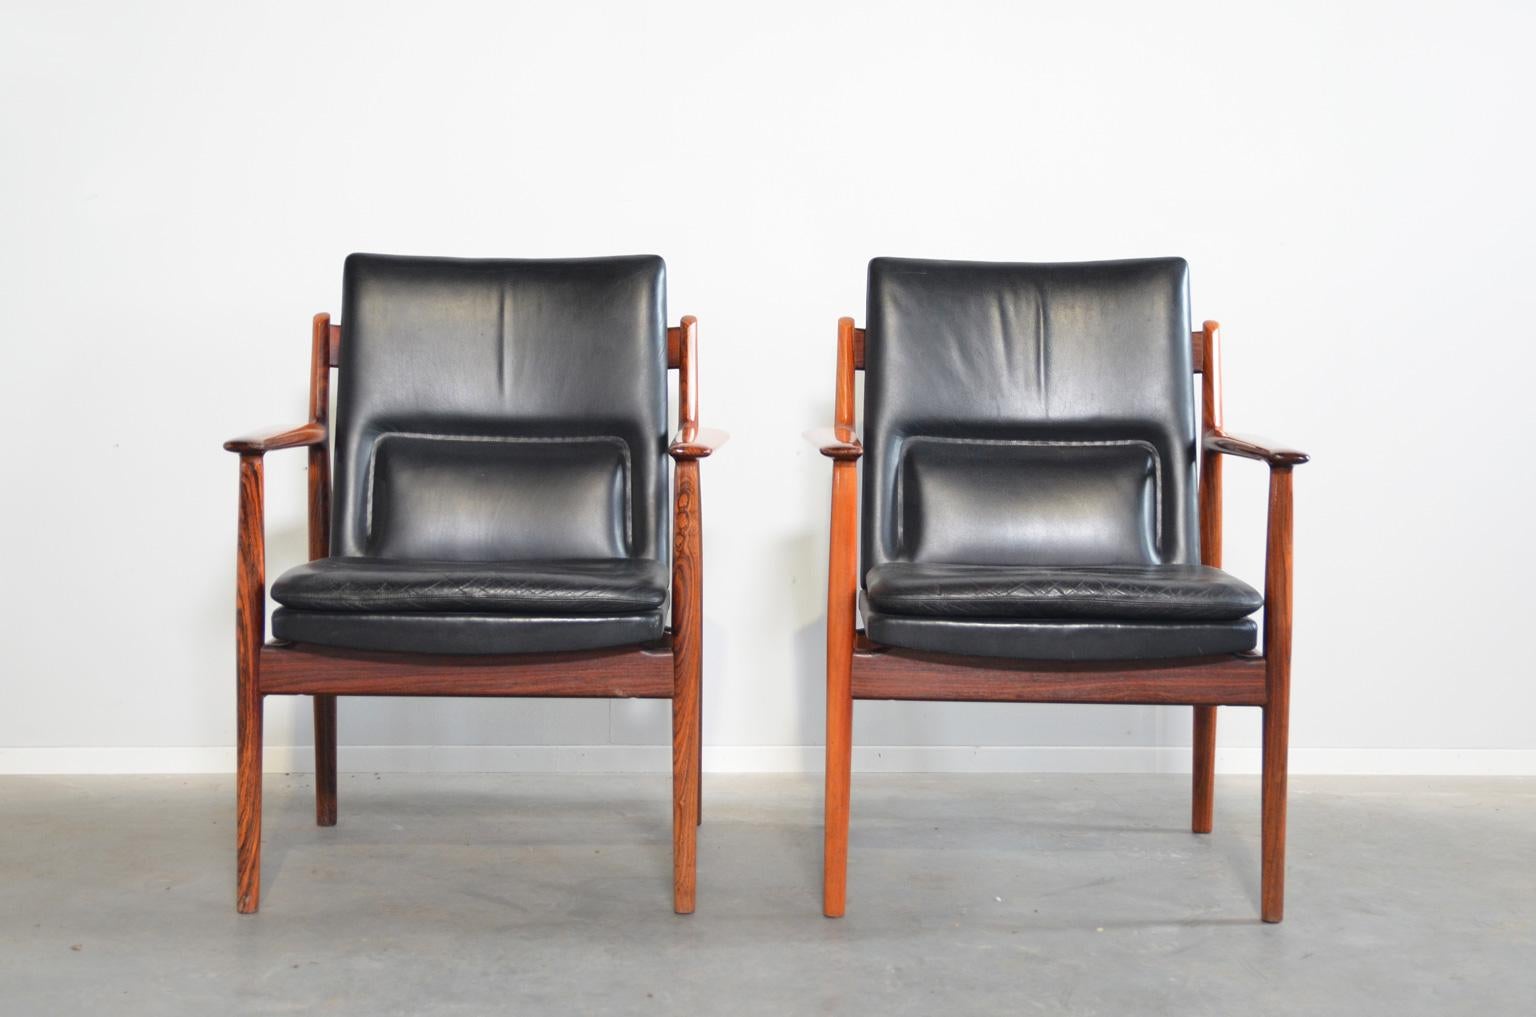 Comfortable rosewood armchairs by Danish designer Arne Vodder. Rosewood frame with a black leather upholstery. The backrest has a built-in extra support for the lower back. The upholstery is original and in very good condition. The chairs are marked